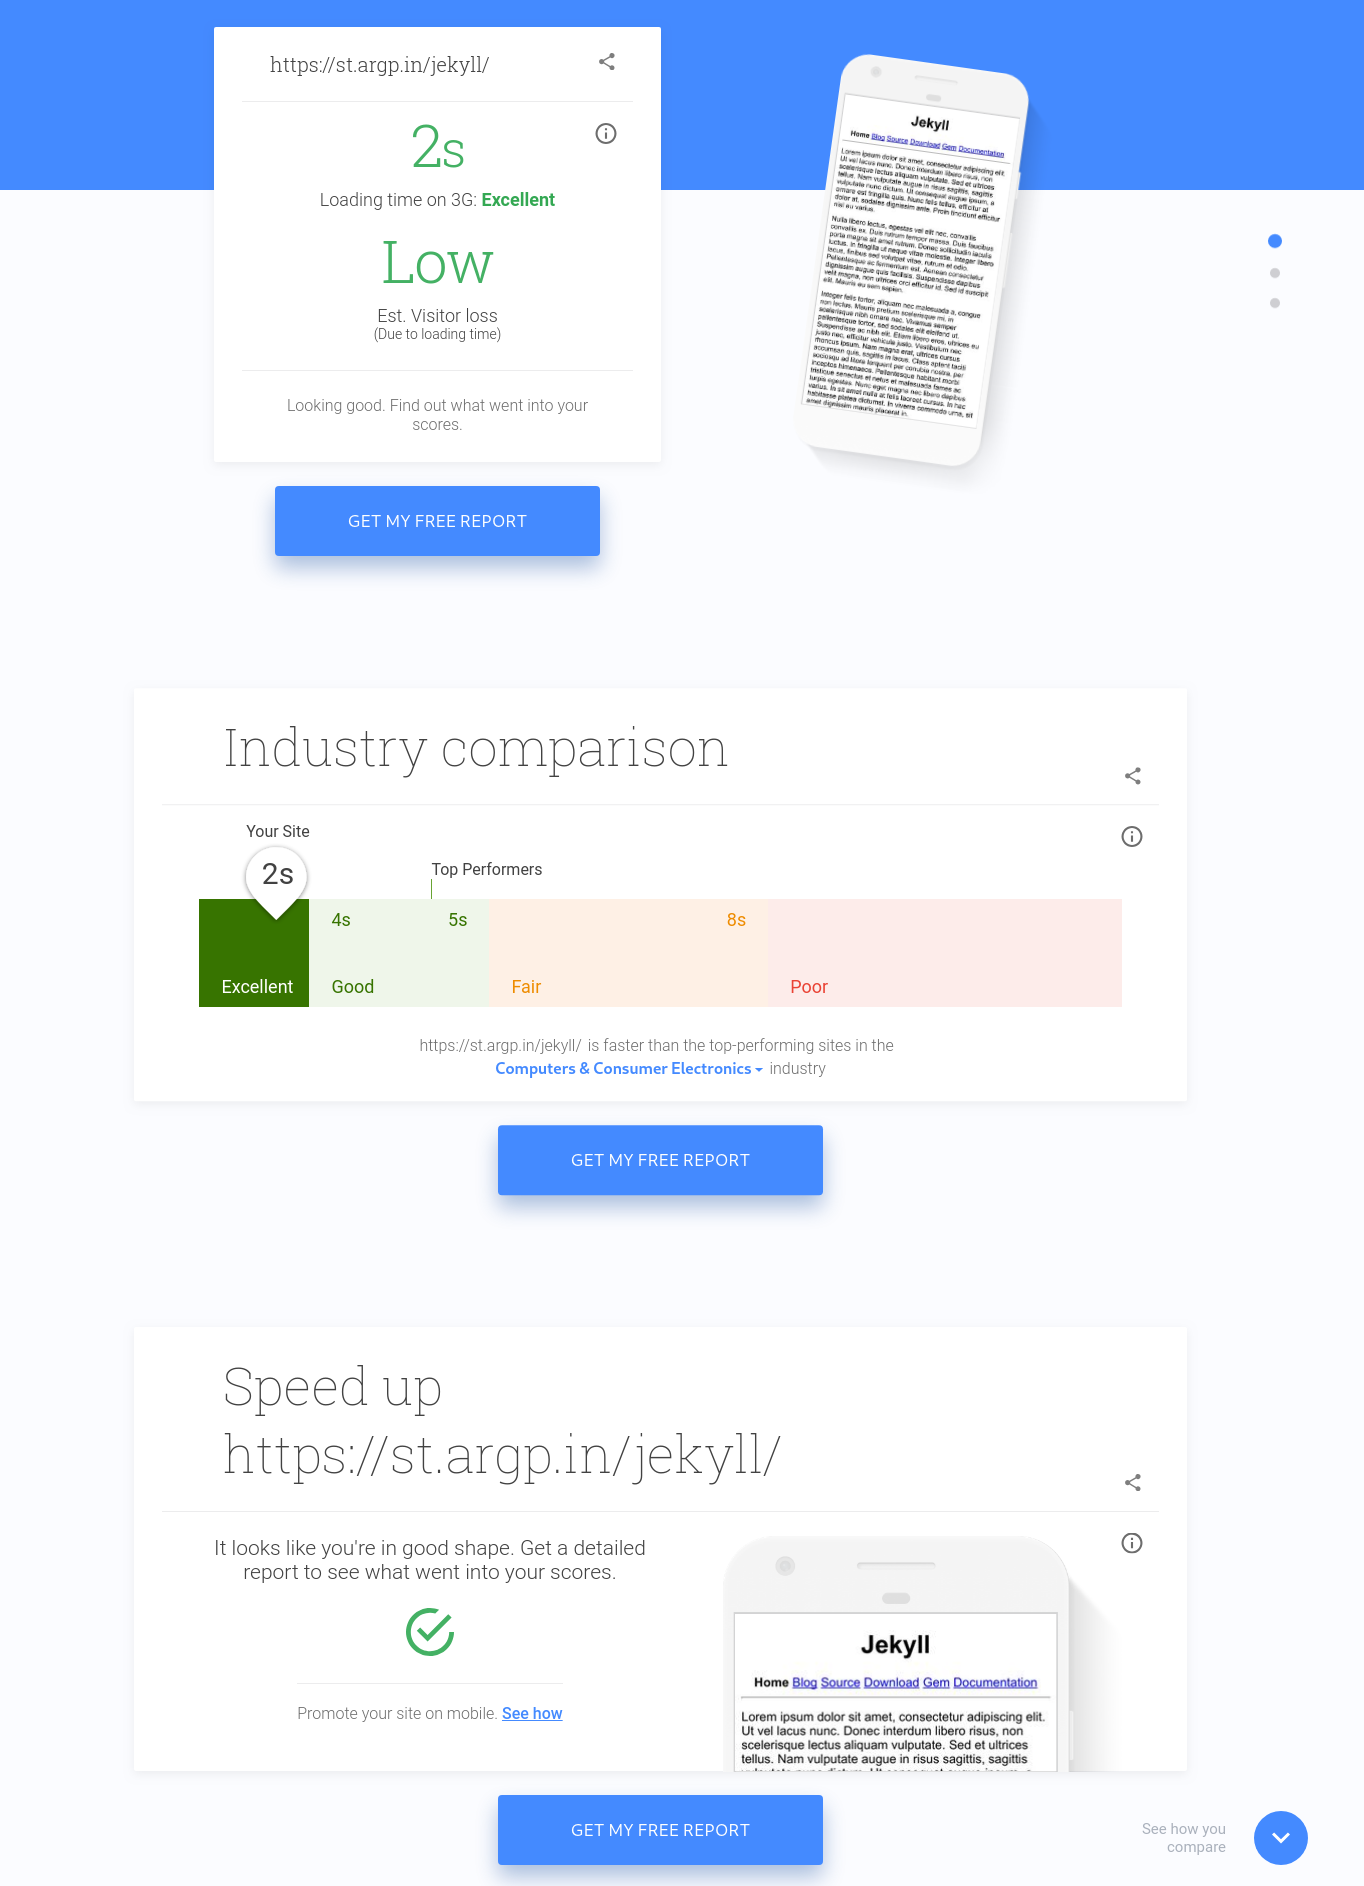 Google Mobile-Friendly Test Results